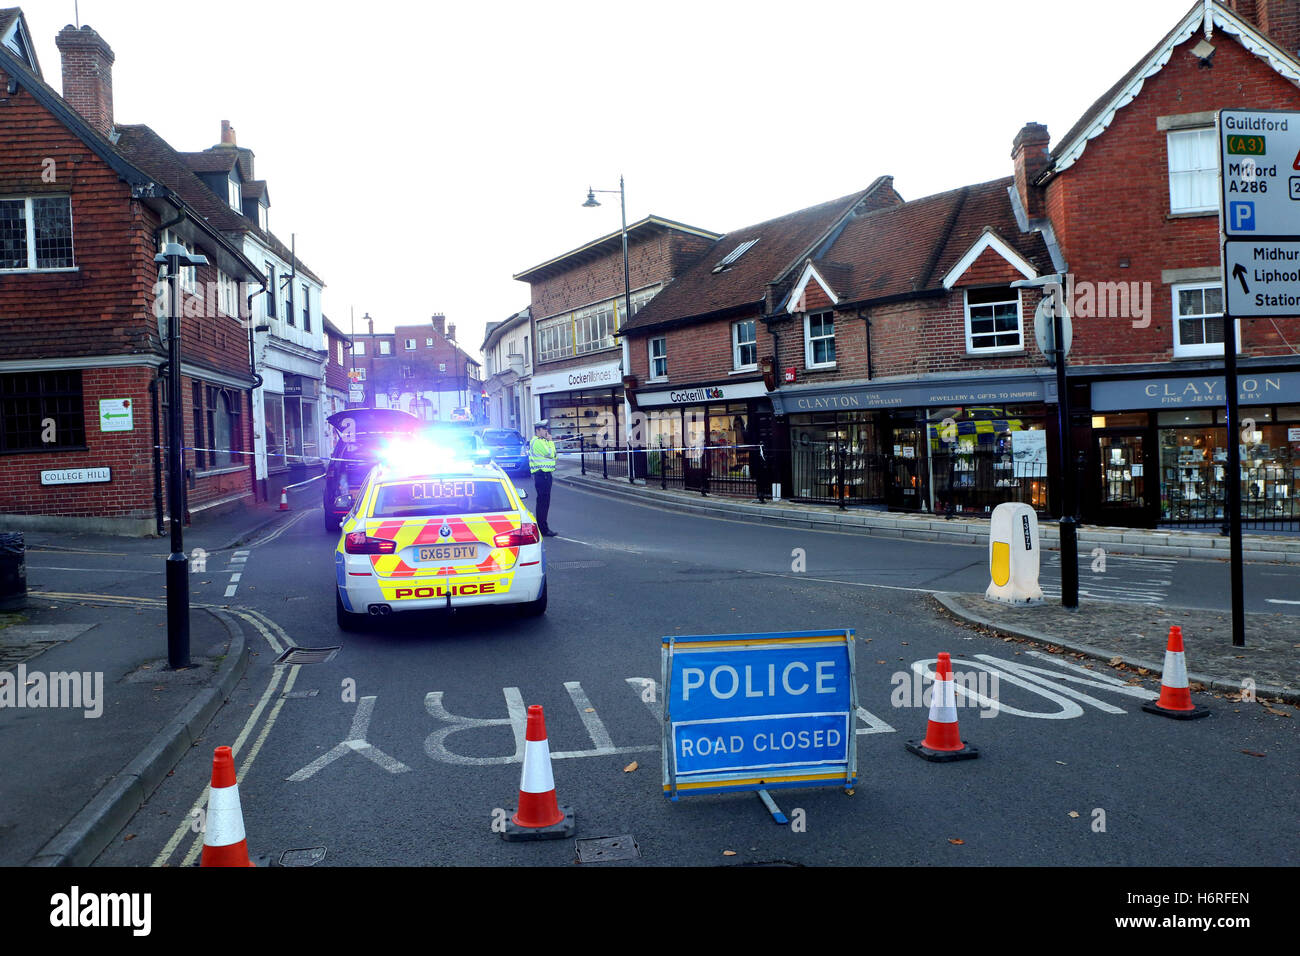 Haslemere Surrey  Monday 31st October 2016. A man in his 80’s  has been airlifted to  hospital following a serious collision  in Haslemere. Surrey Police have  confirmed  a man in his 80s has been taken to St George’s Hospital with serious head injuries.  It is believed  that moments before the man had been out shopping for shoes in the near by Cockerill Shoes. Staff who witnesses the incident ran  with first aid kits to offer assistance  before the arrival of the emergency services. Credit:  uknip/Alamy Live News Stock Photo